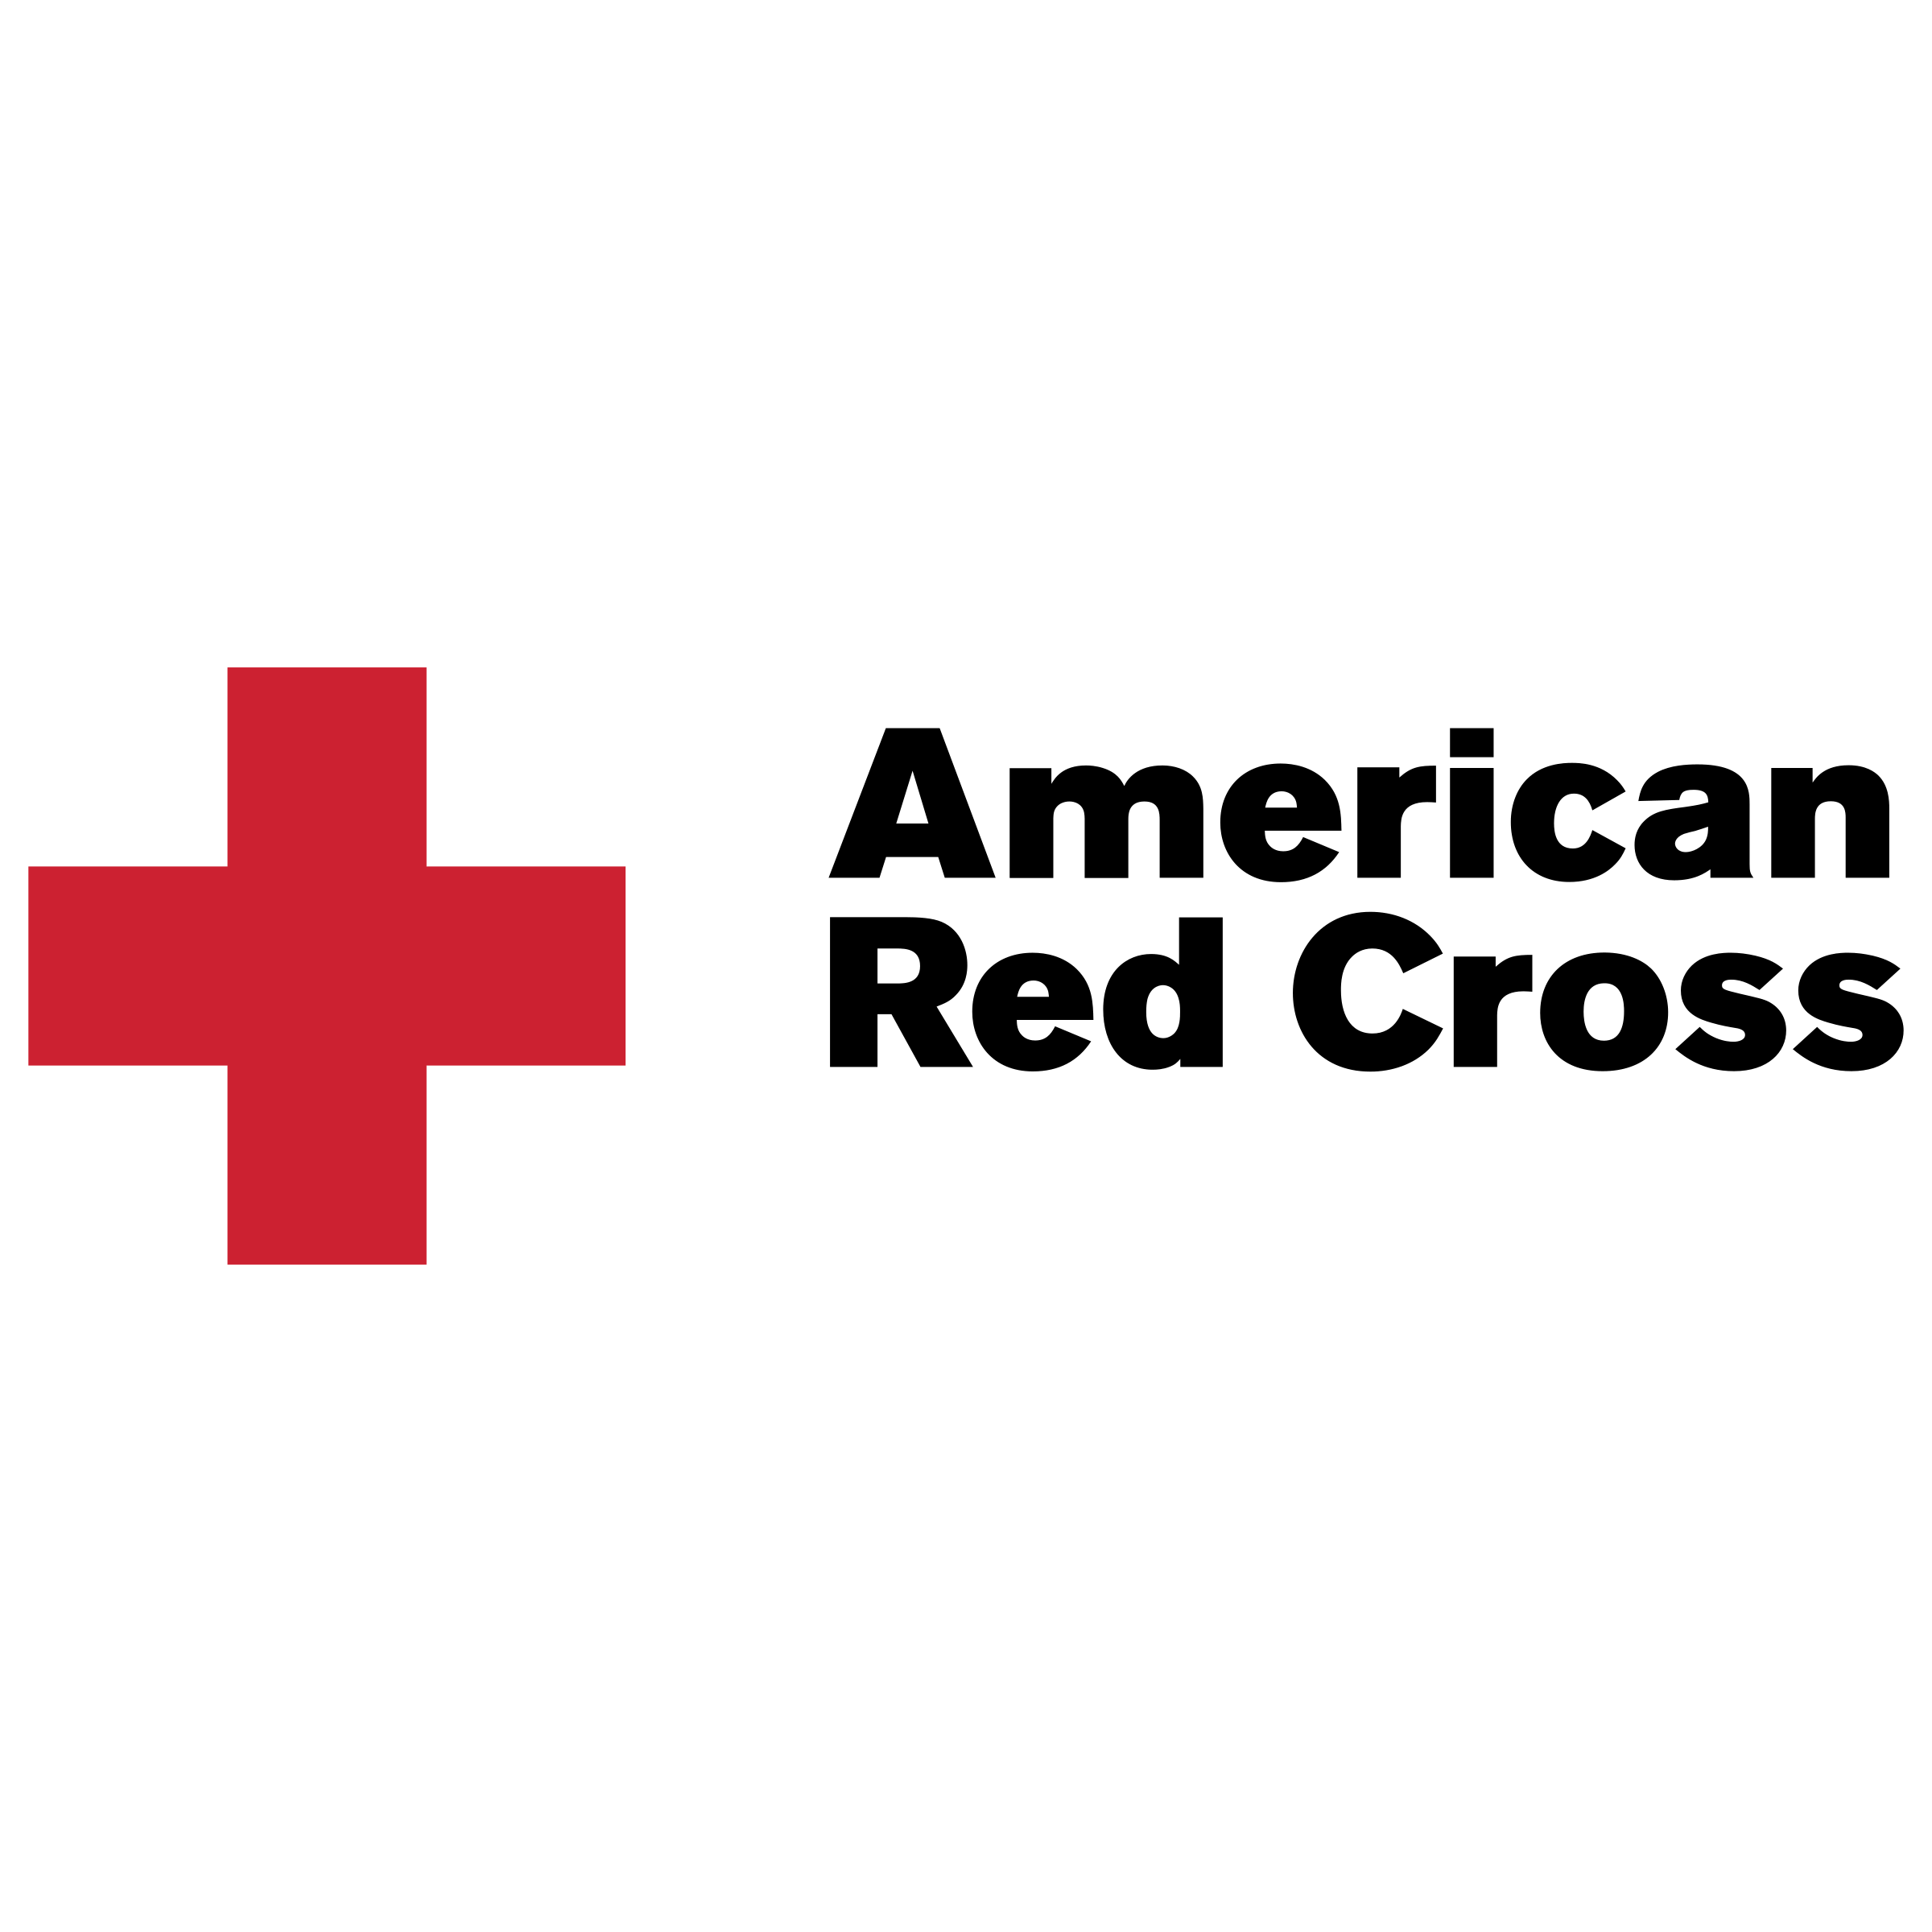 Large American Red Cross Logo - American Red Cross Logo PNG Transparent & SVG Vector